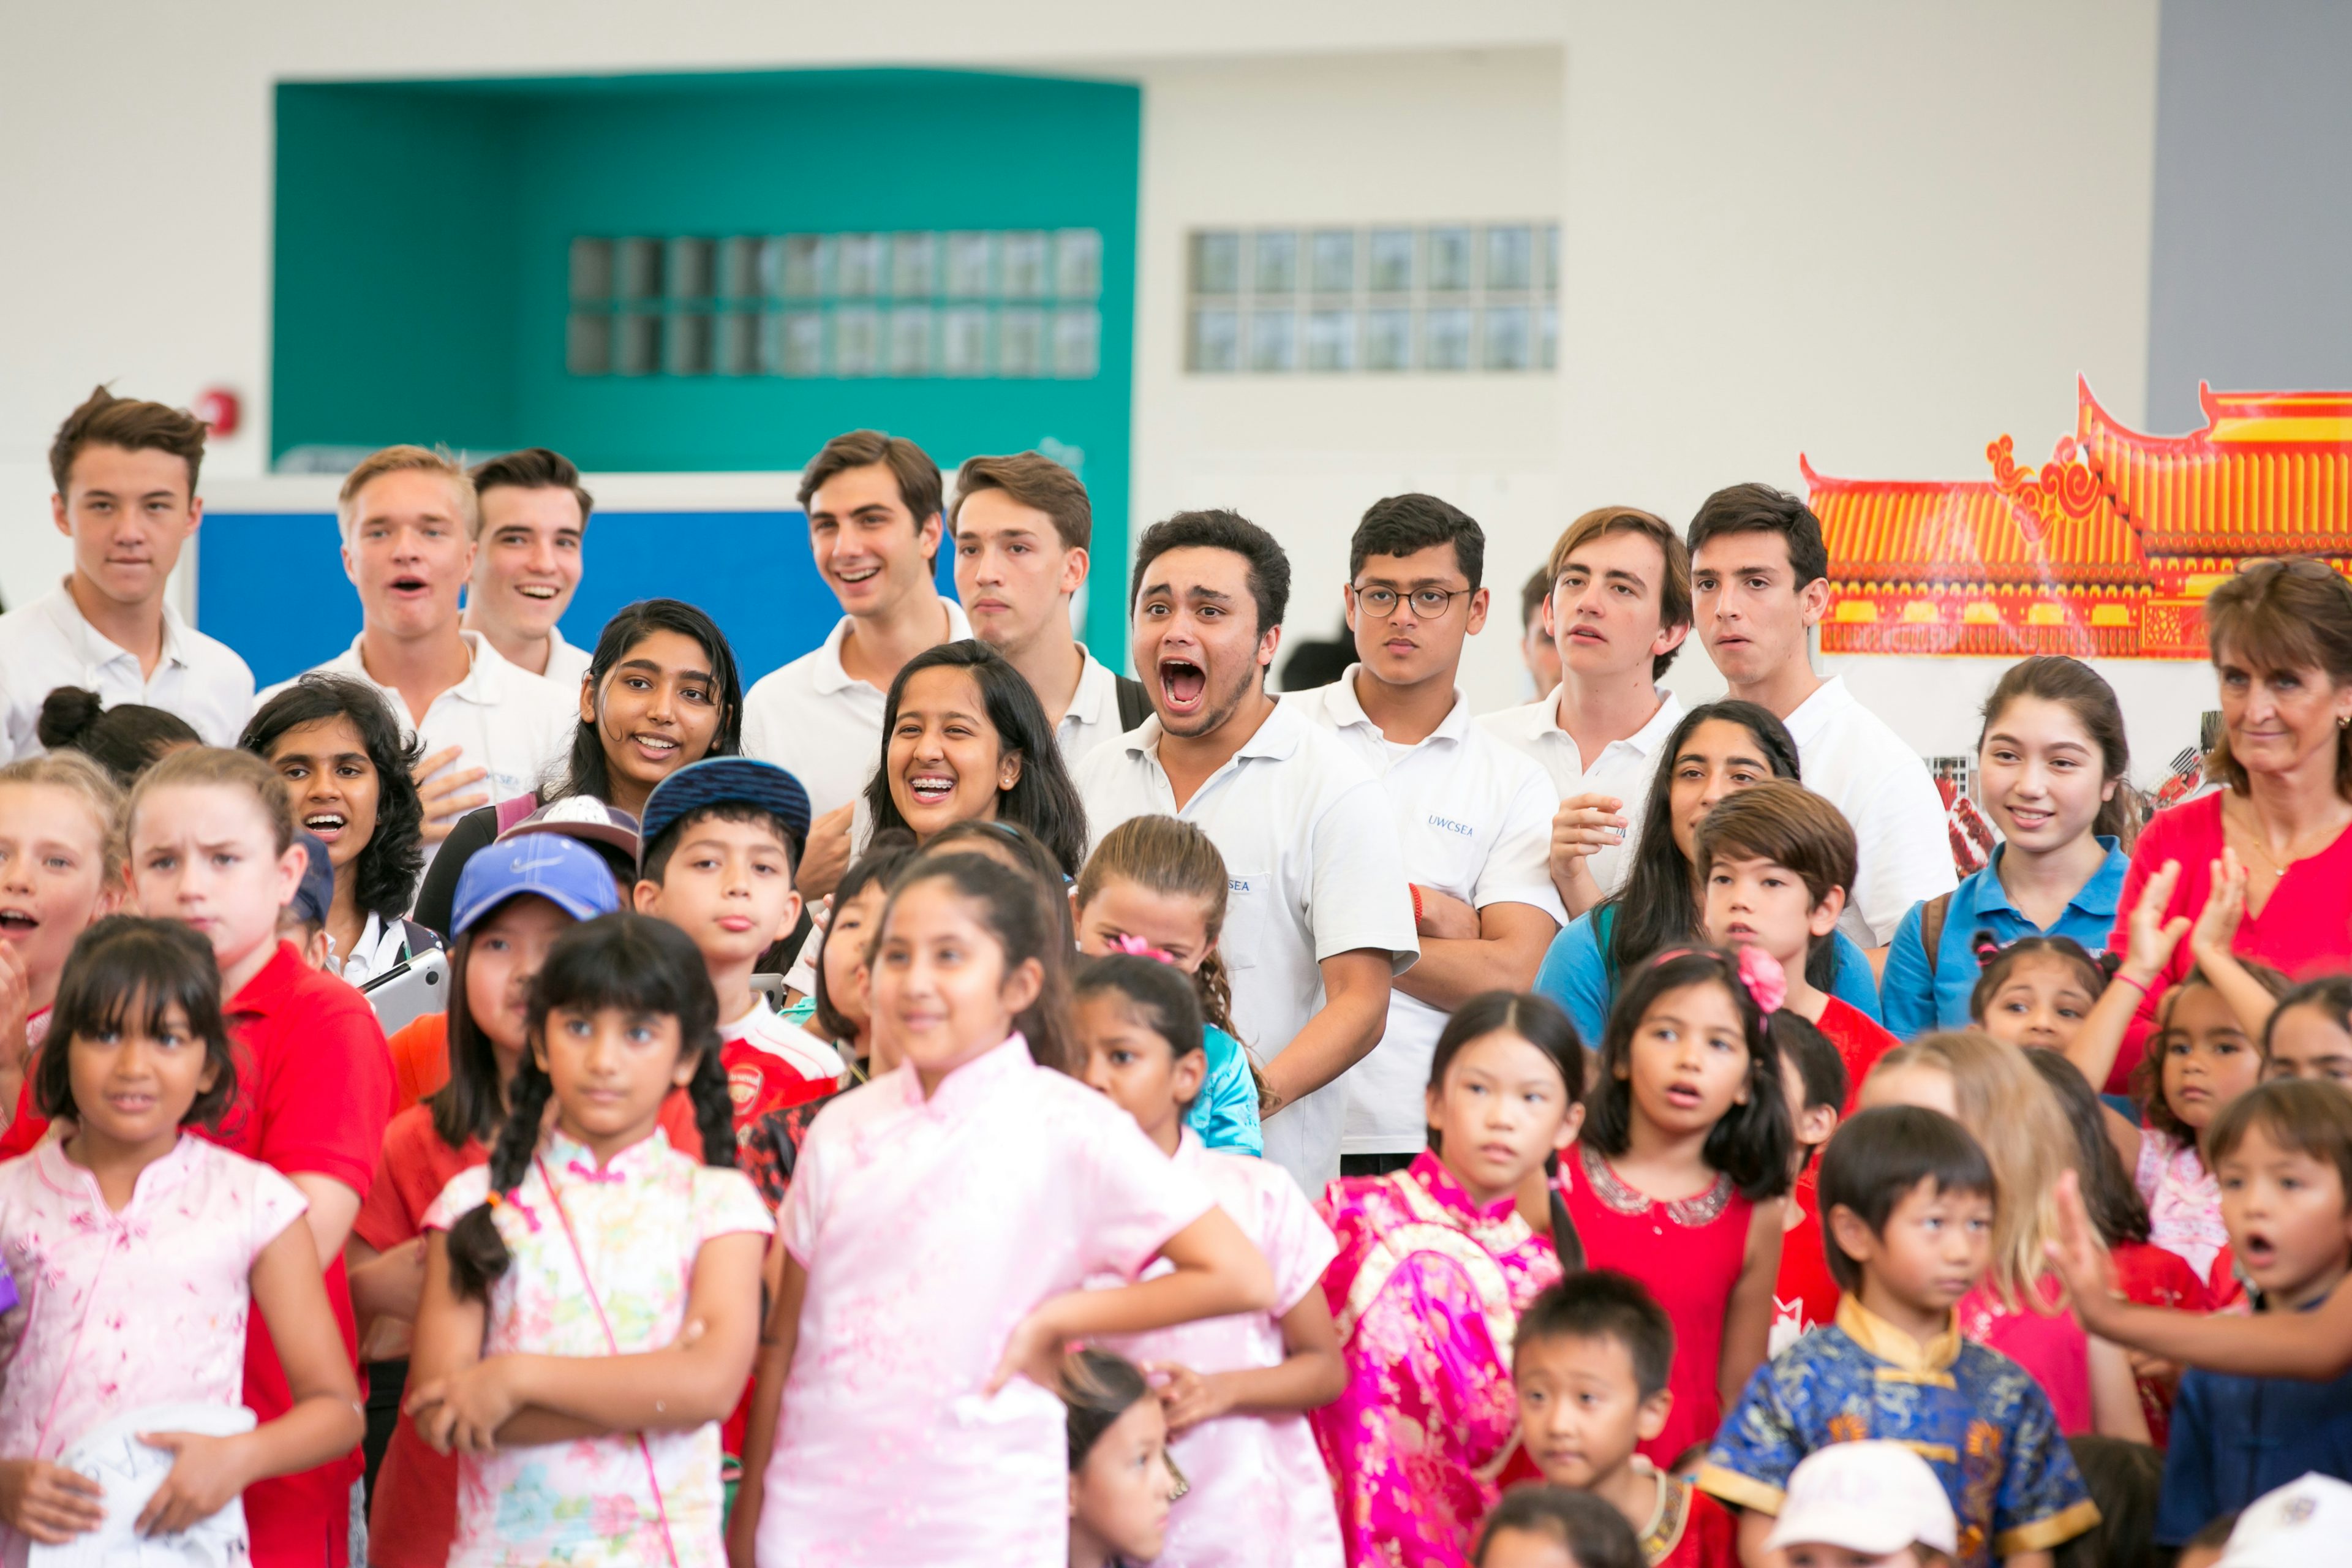 A group of students and young children